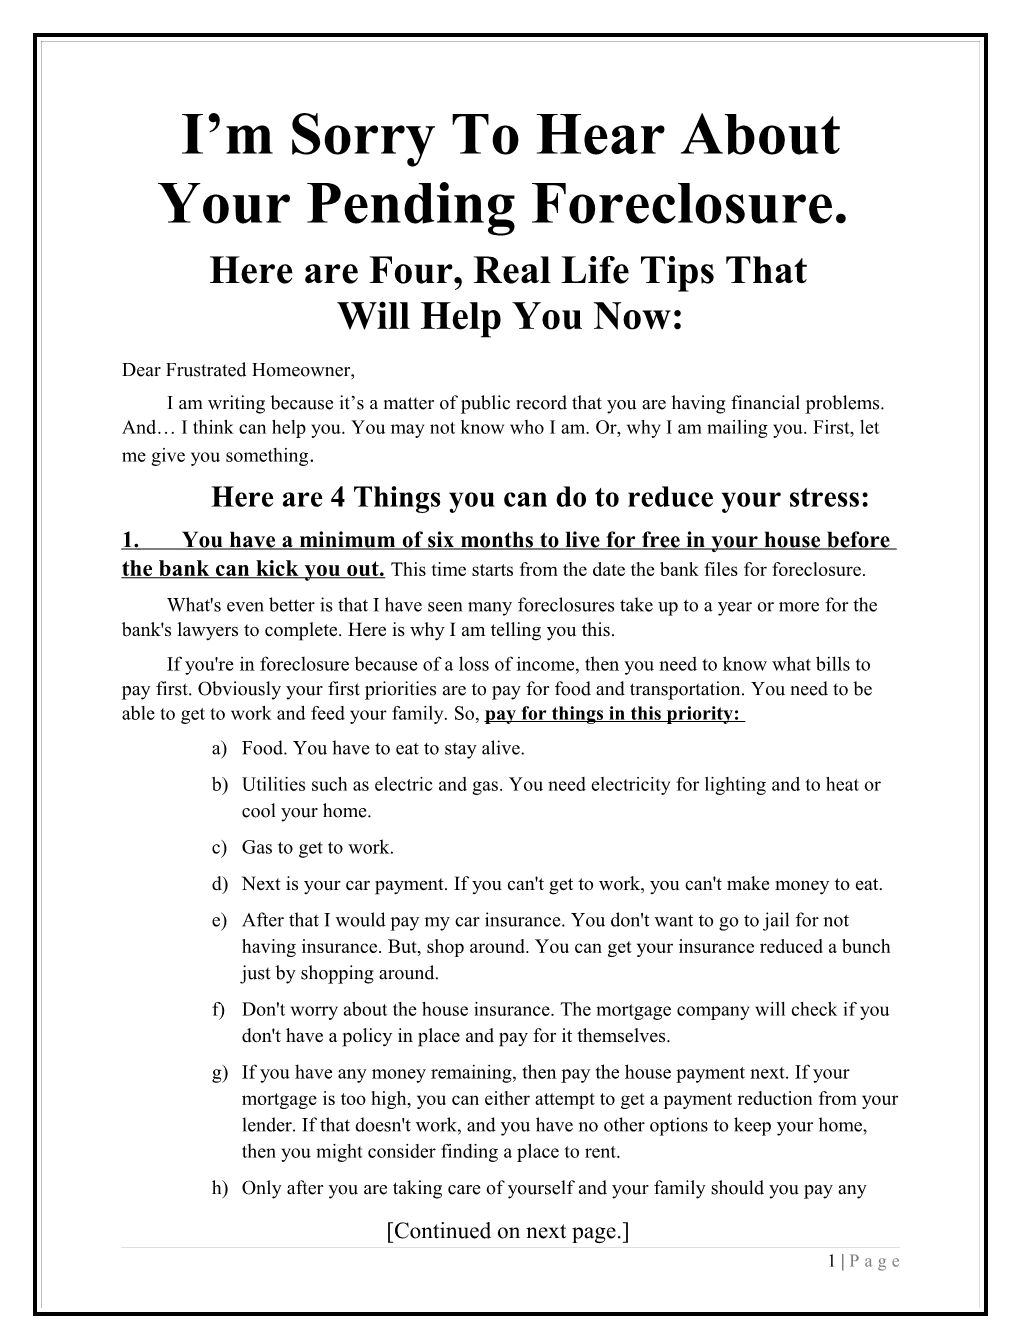 I M Sorry to Hear About Your Pending Foreclosure